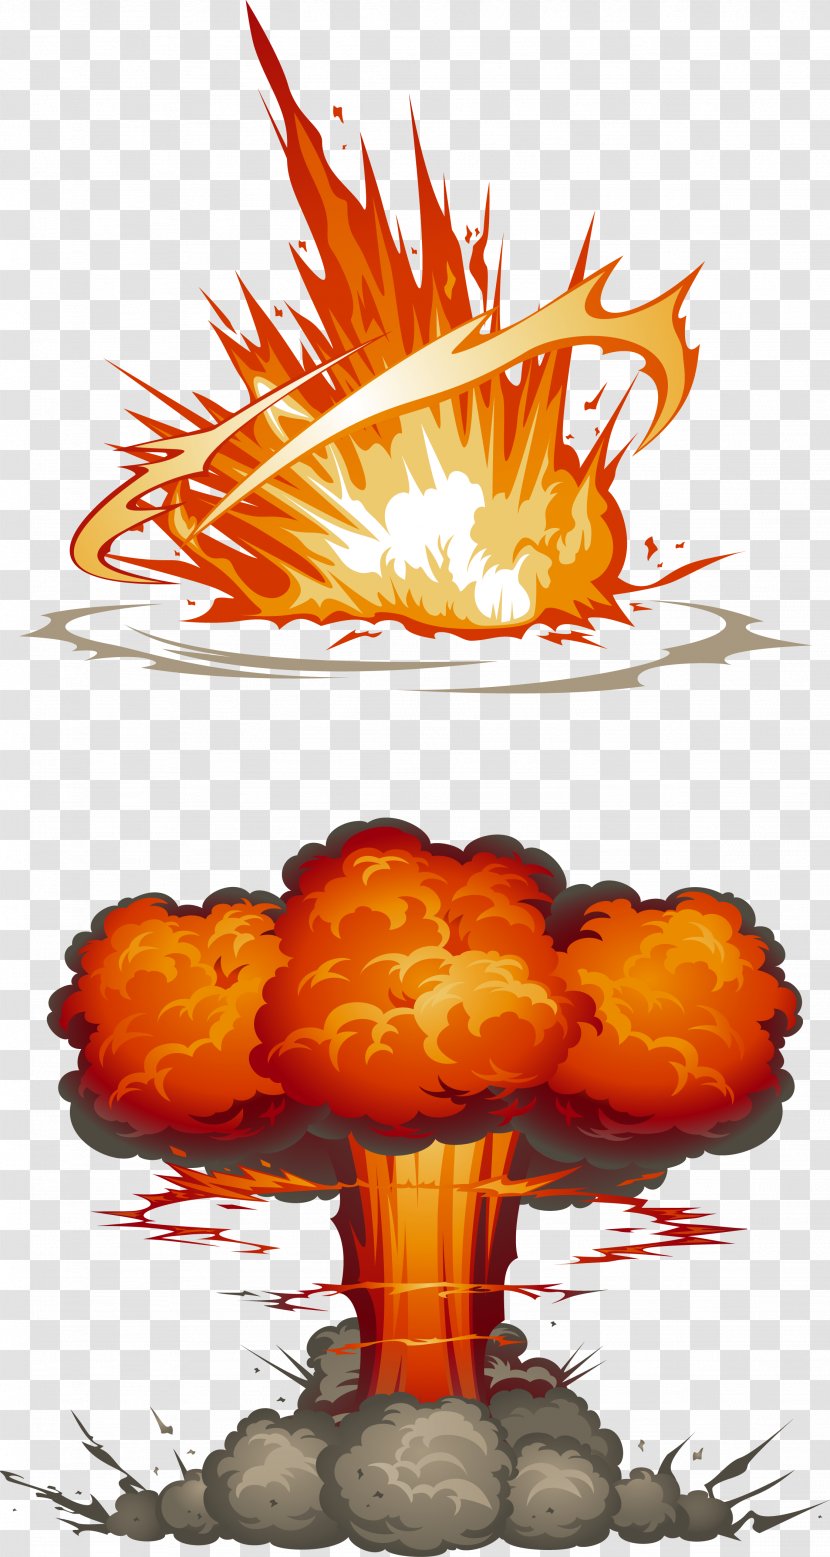 Explosion Download - Fictional Character - Explosions Transparent PNG